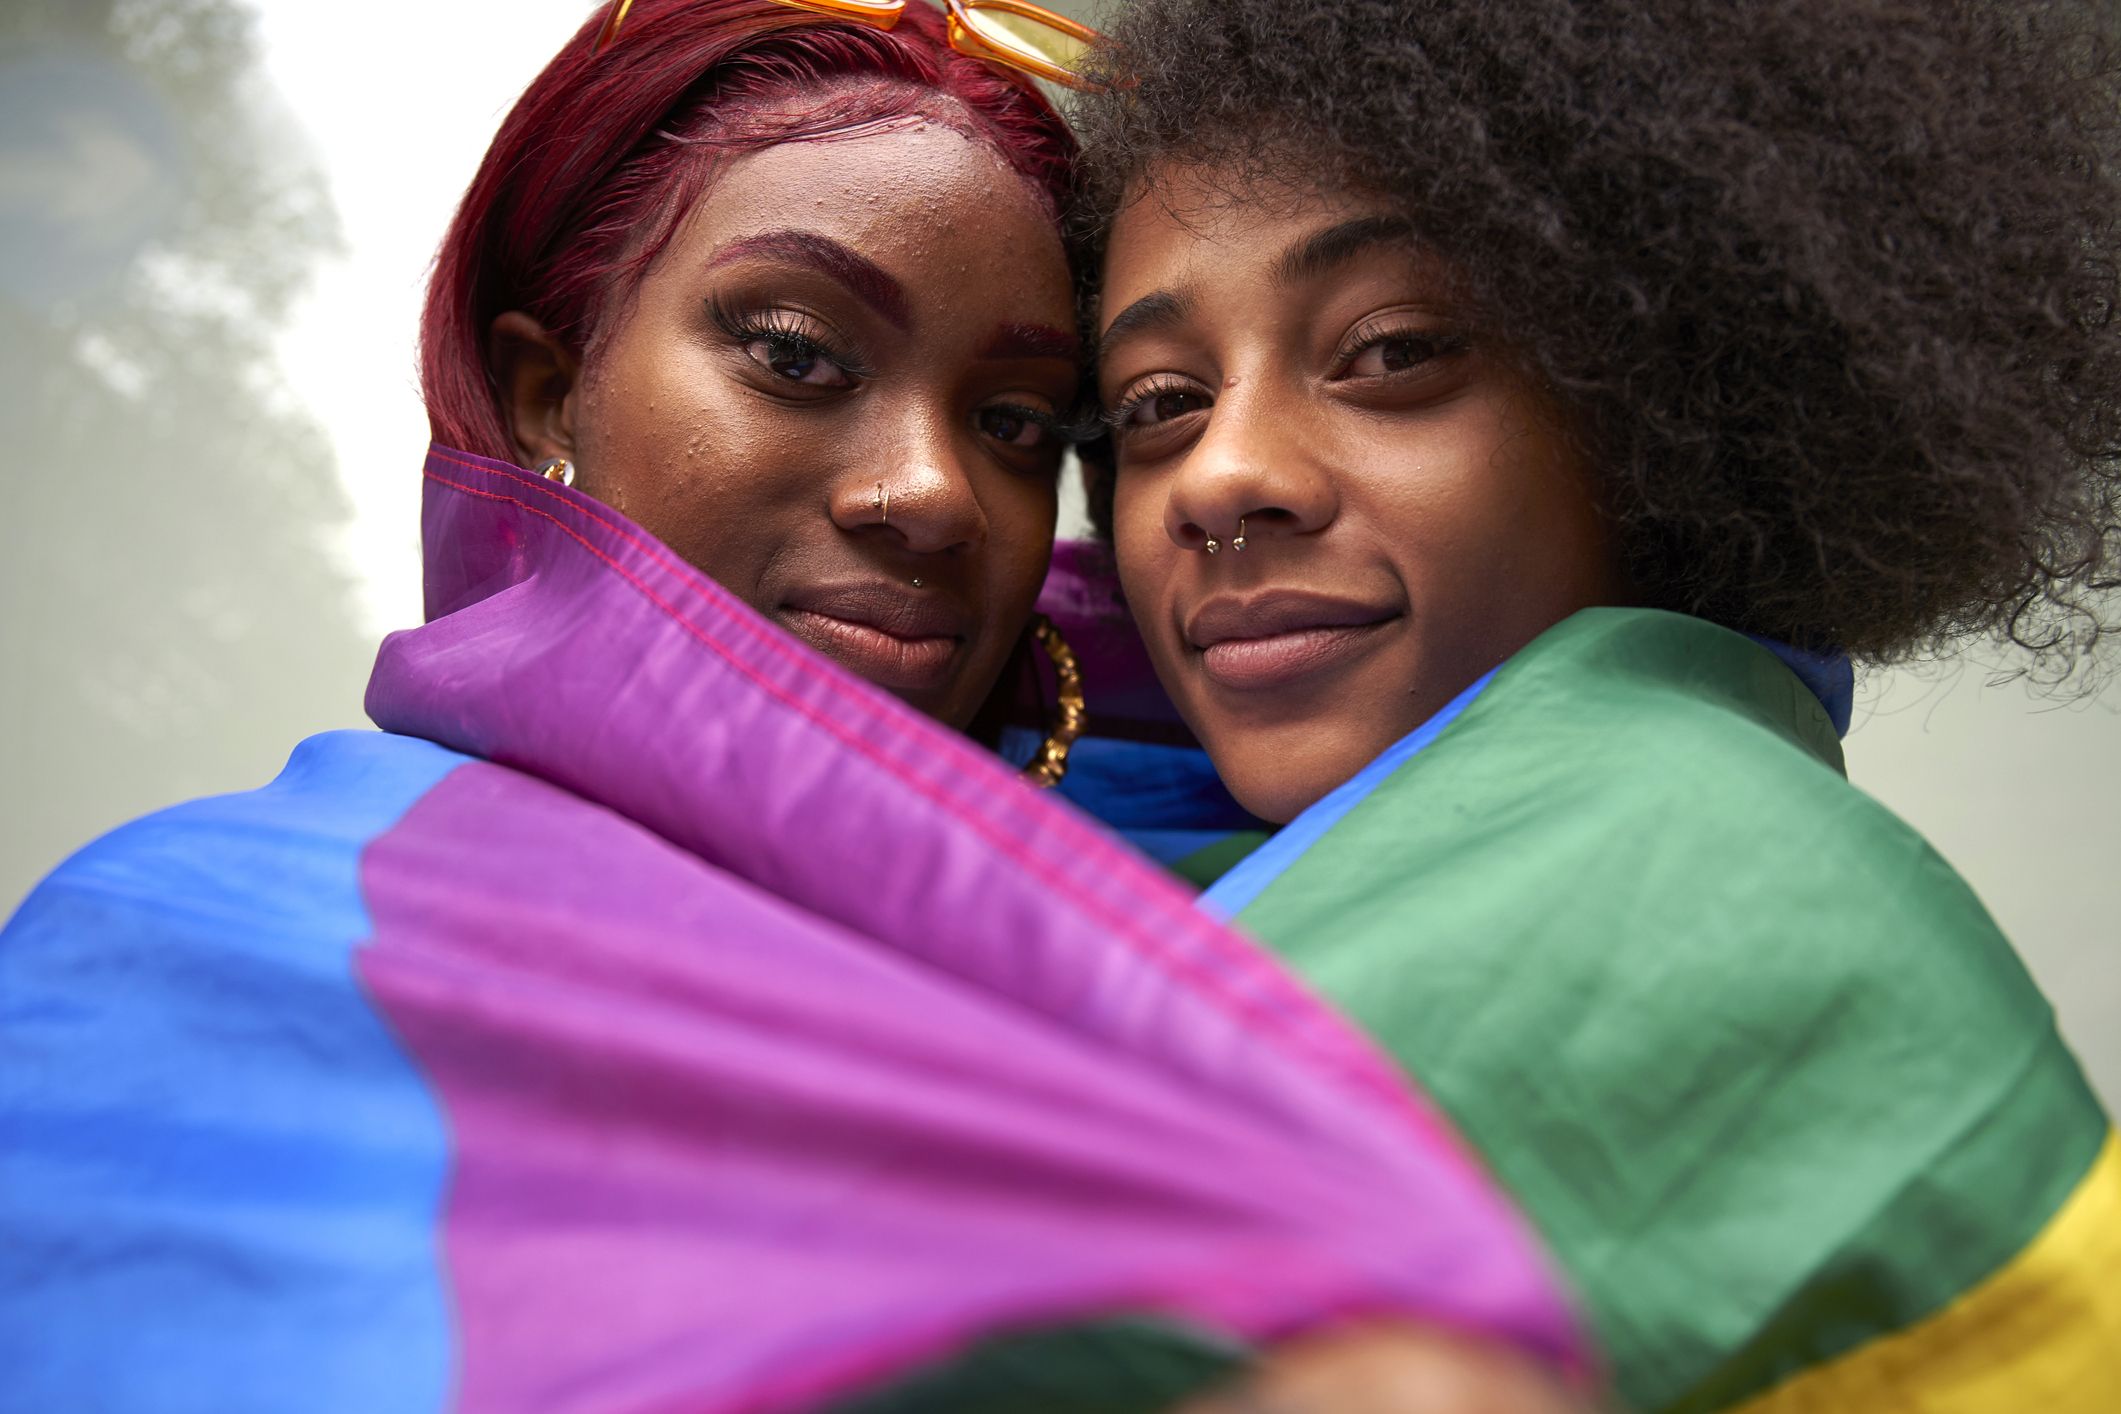 Black And White People Porn Lesbian - The History And Meaning Of The Lesbian Pride Flag, Explained